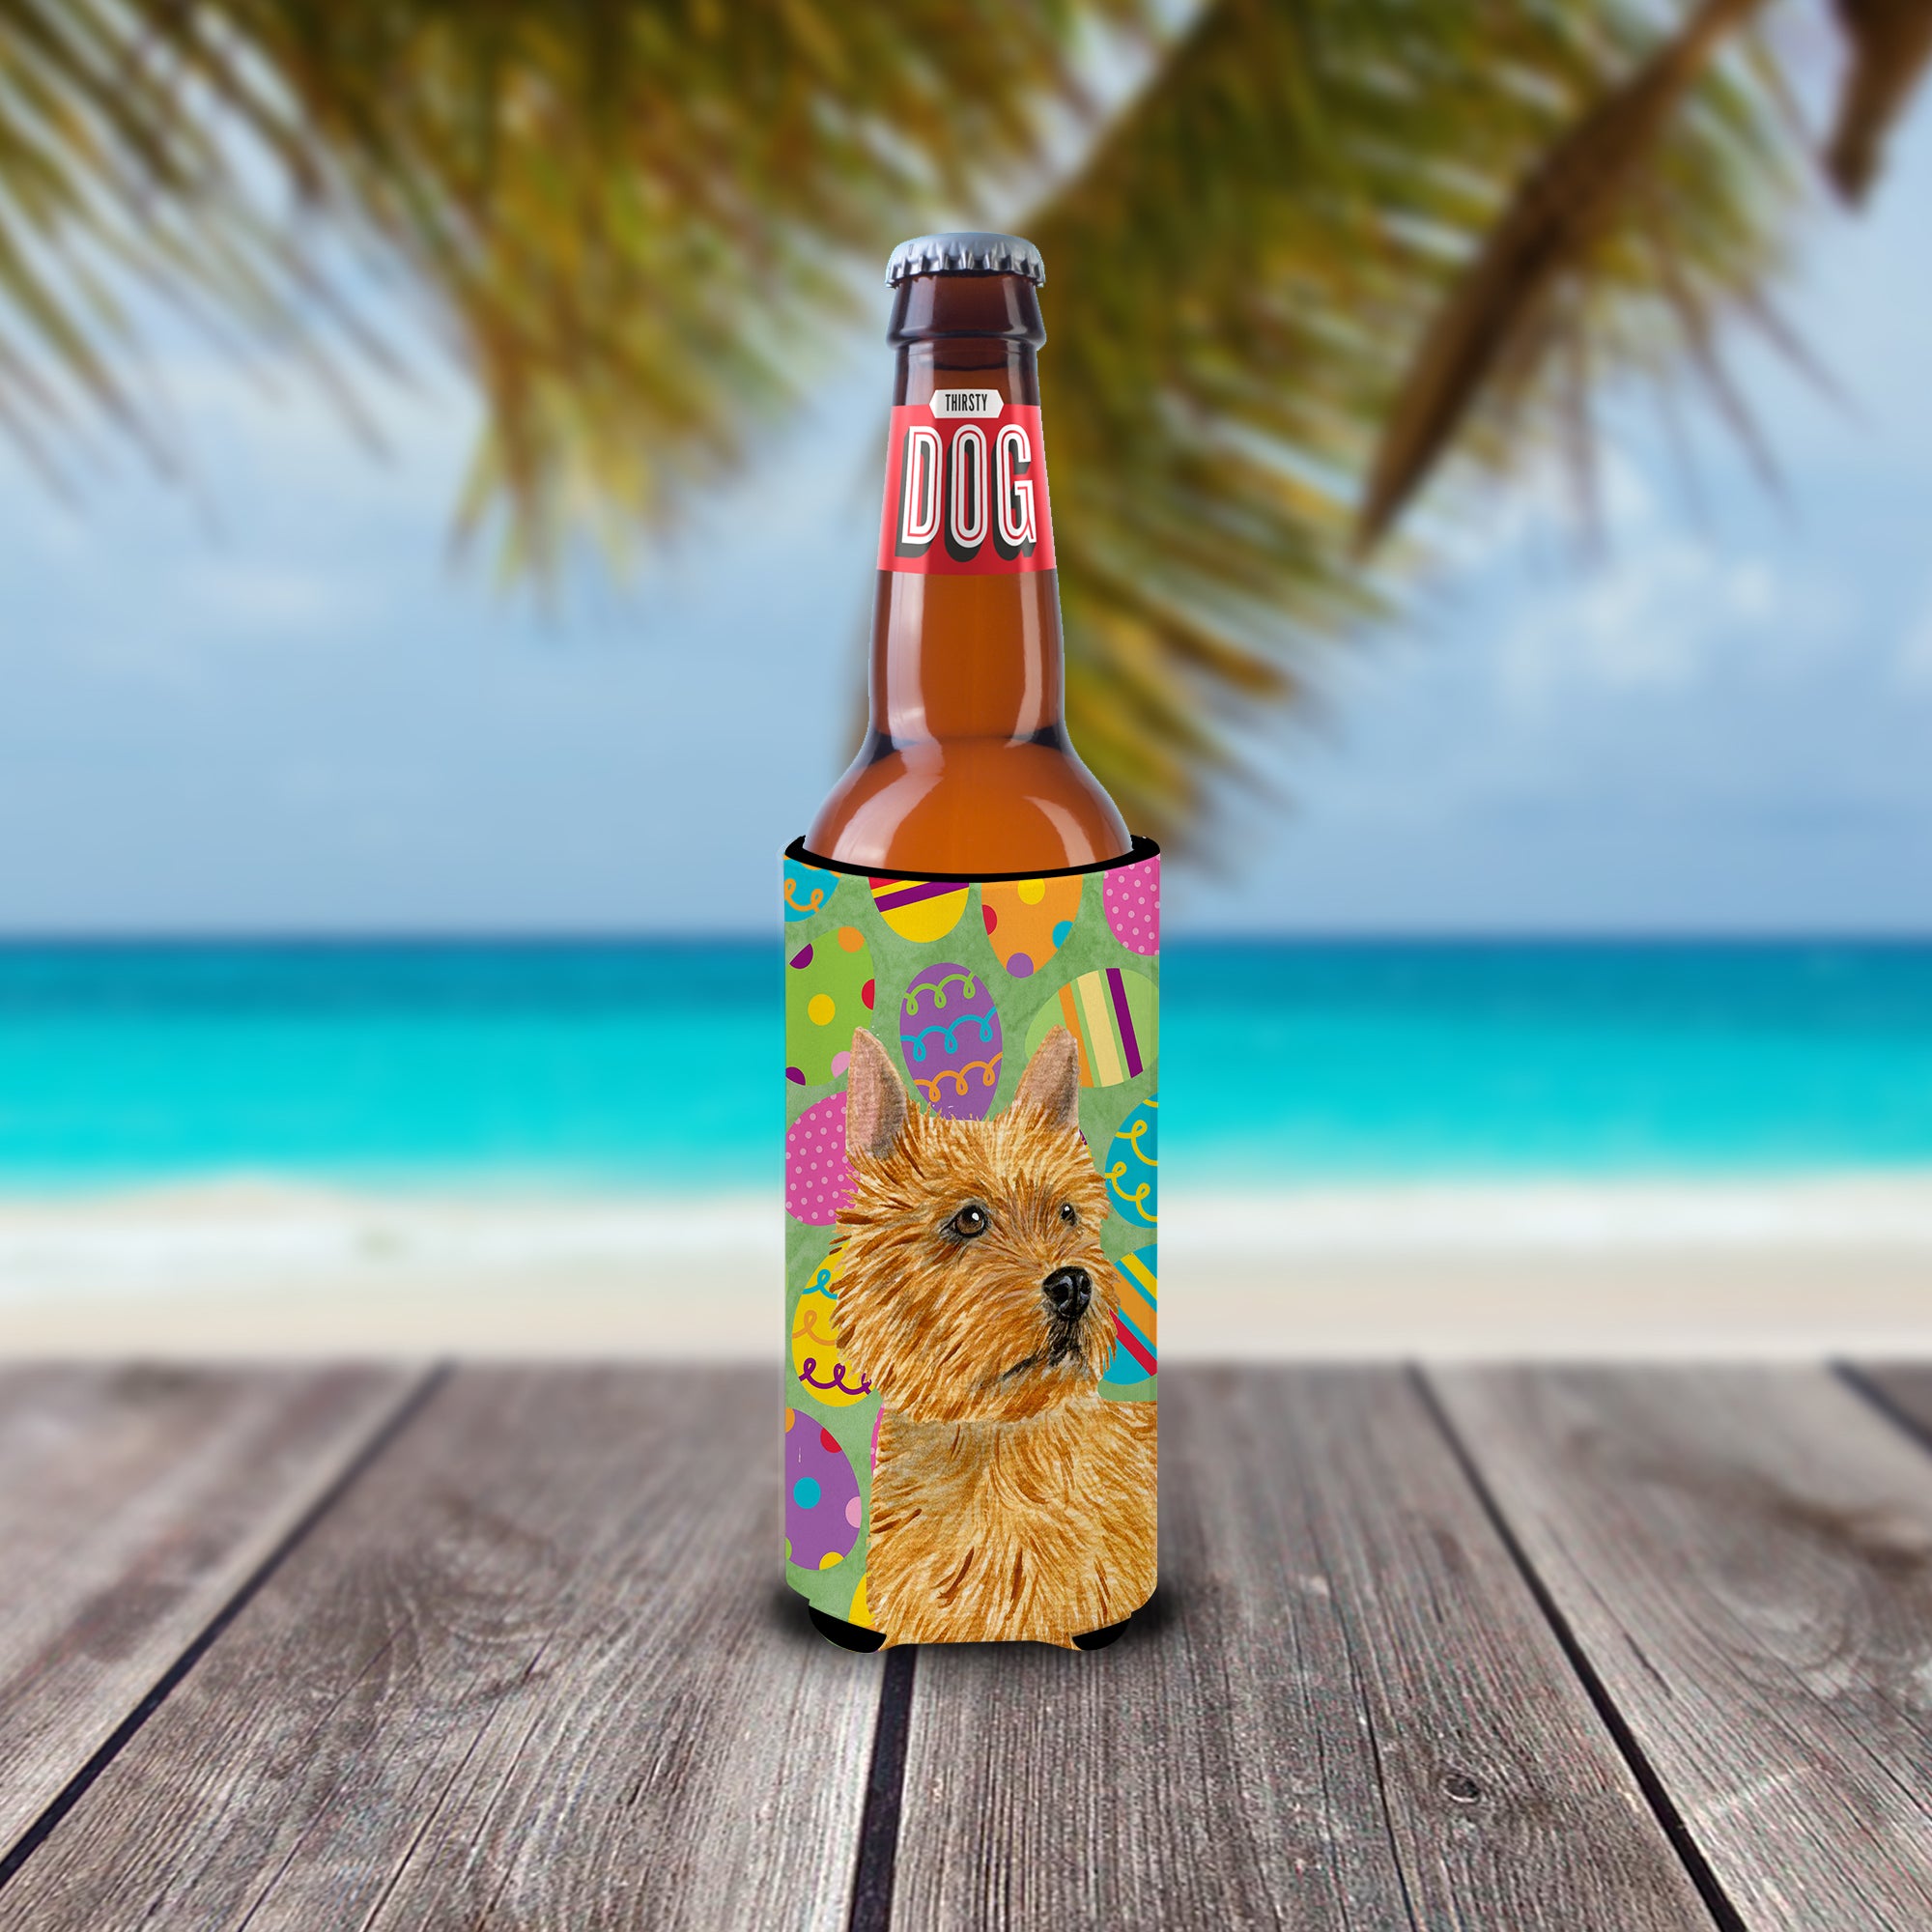 Norwich Terrier Easter Eggtravaganza Ultra Beverage Insulators for slim cans SS4844MUK